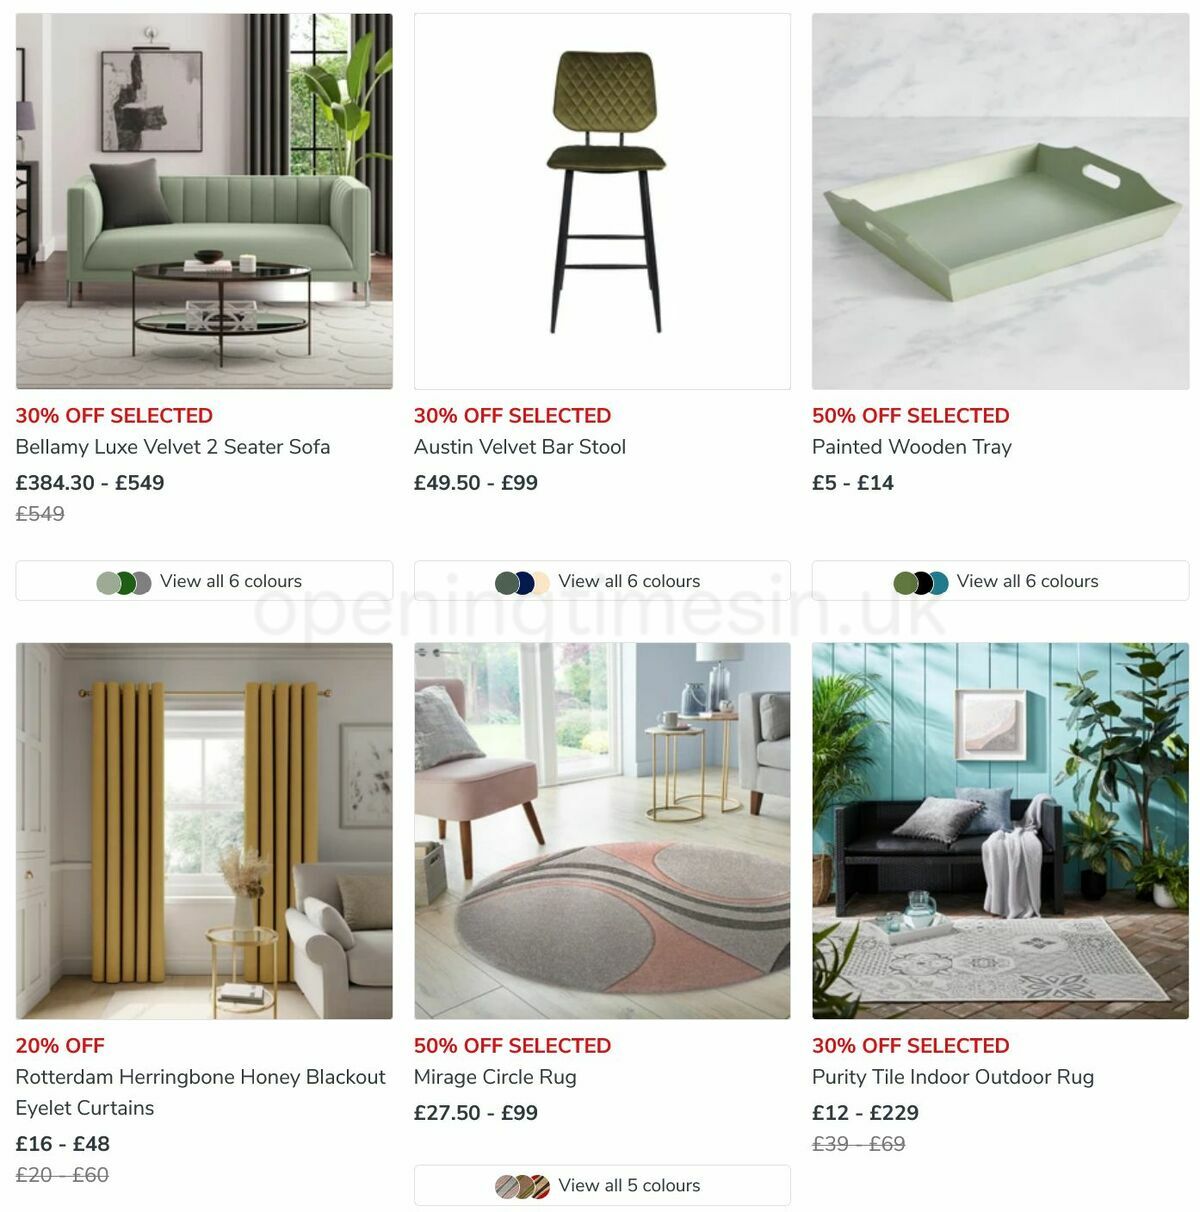 Dunelm Offers from 25 July